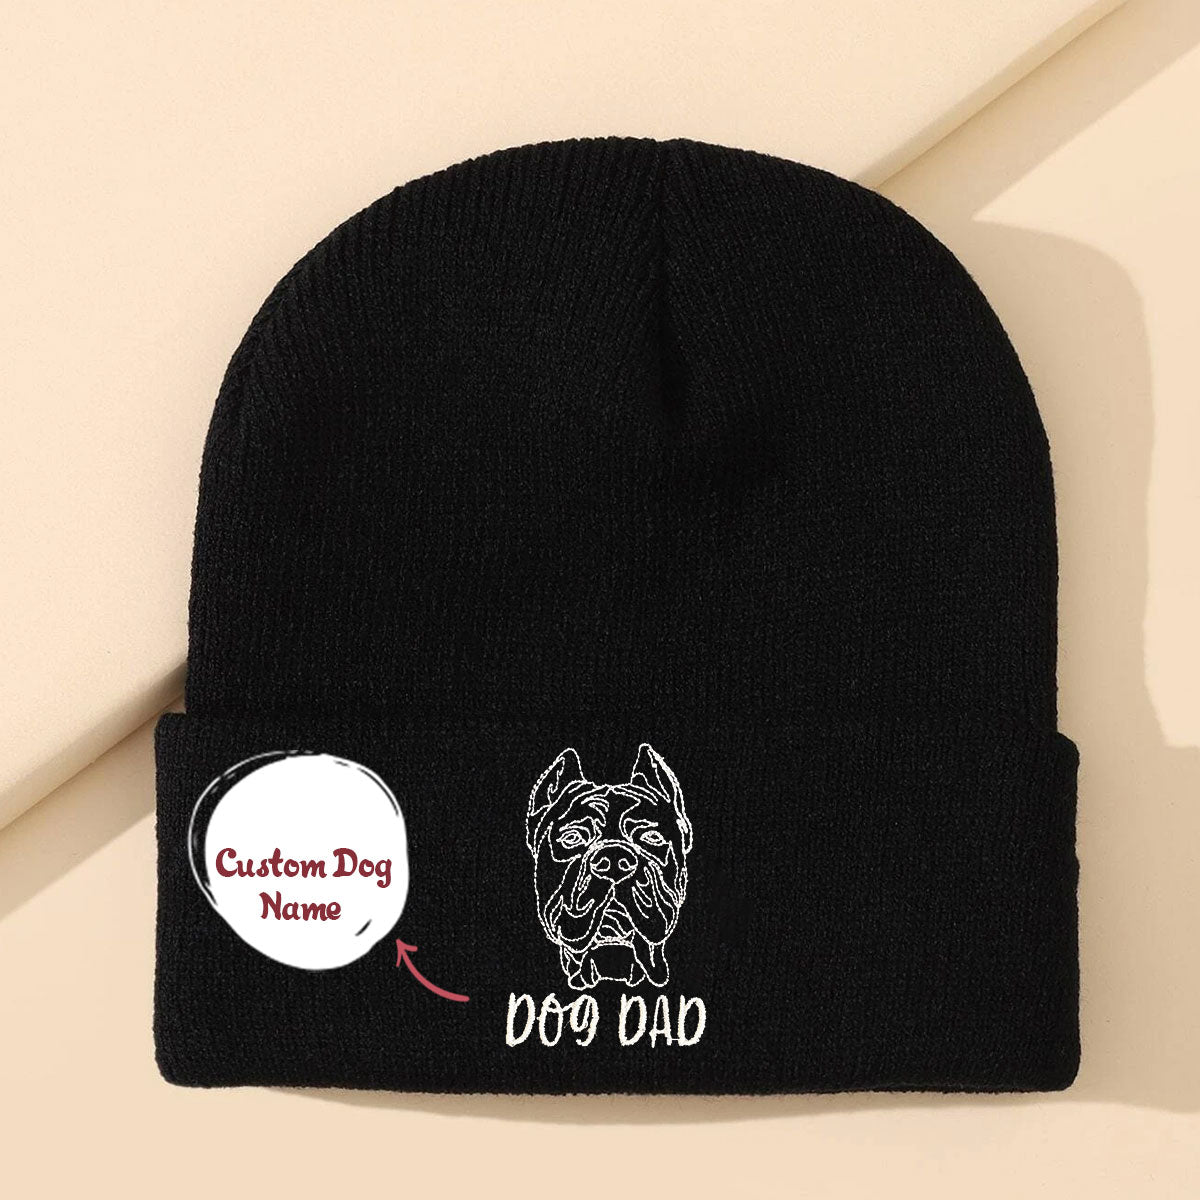 Personalized Cane Corso Dog Dad Embroidered Beanie, Custom Beanie with Dog Name, Cane Corso Gifts Dog Lovers